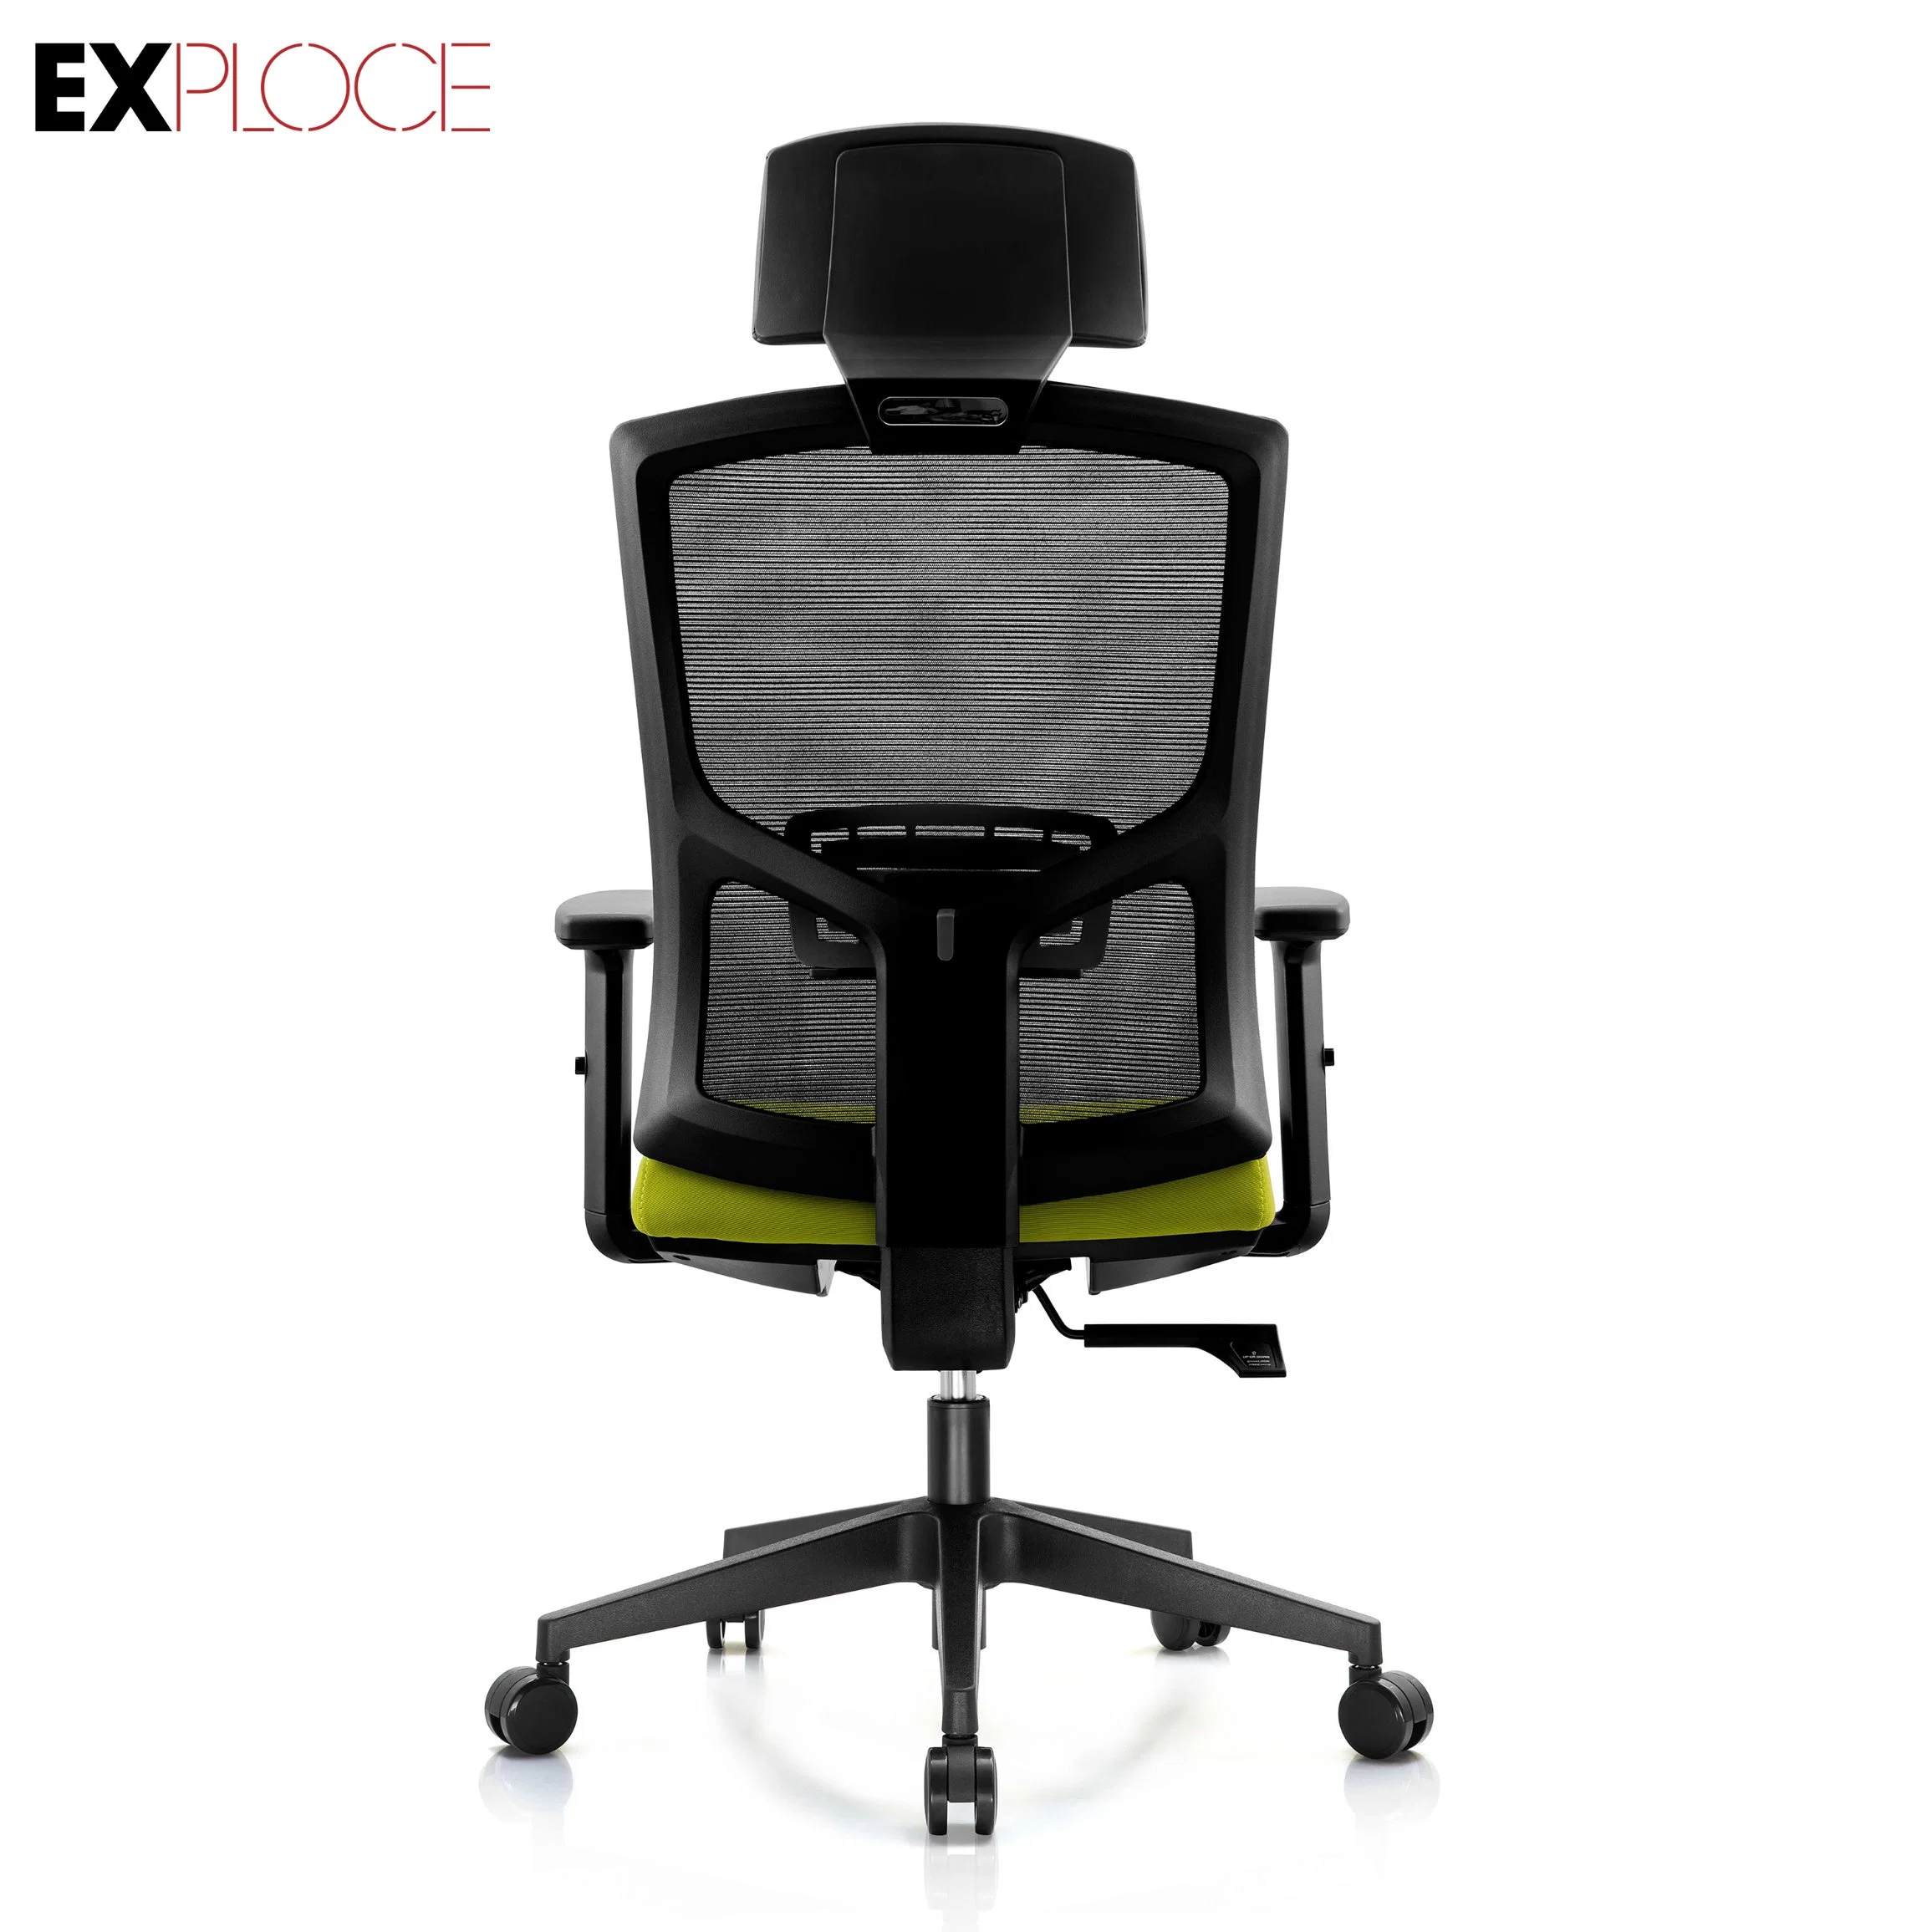 PU Mesh Headrest for Choose 3 Position Locking Mechanism TPU up and Down Armrest Office Boss Table Swivel Chair Design Home Furniture